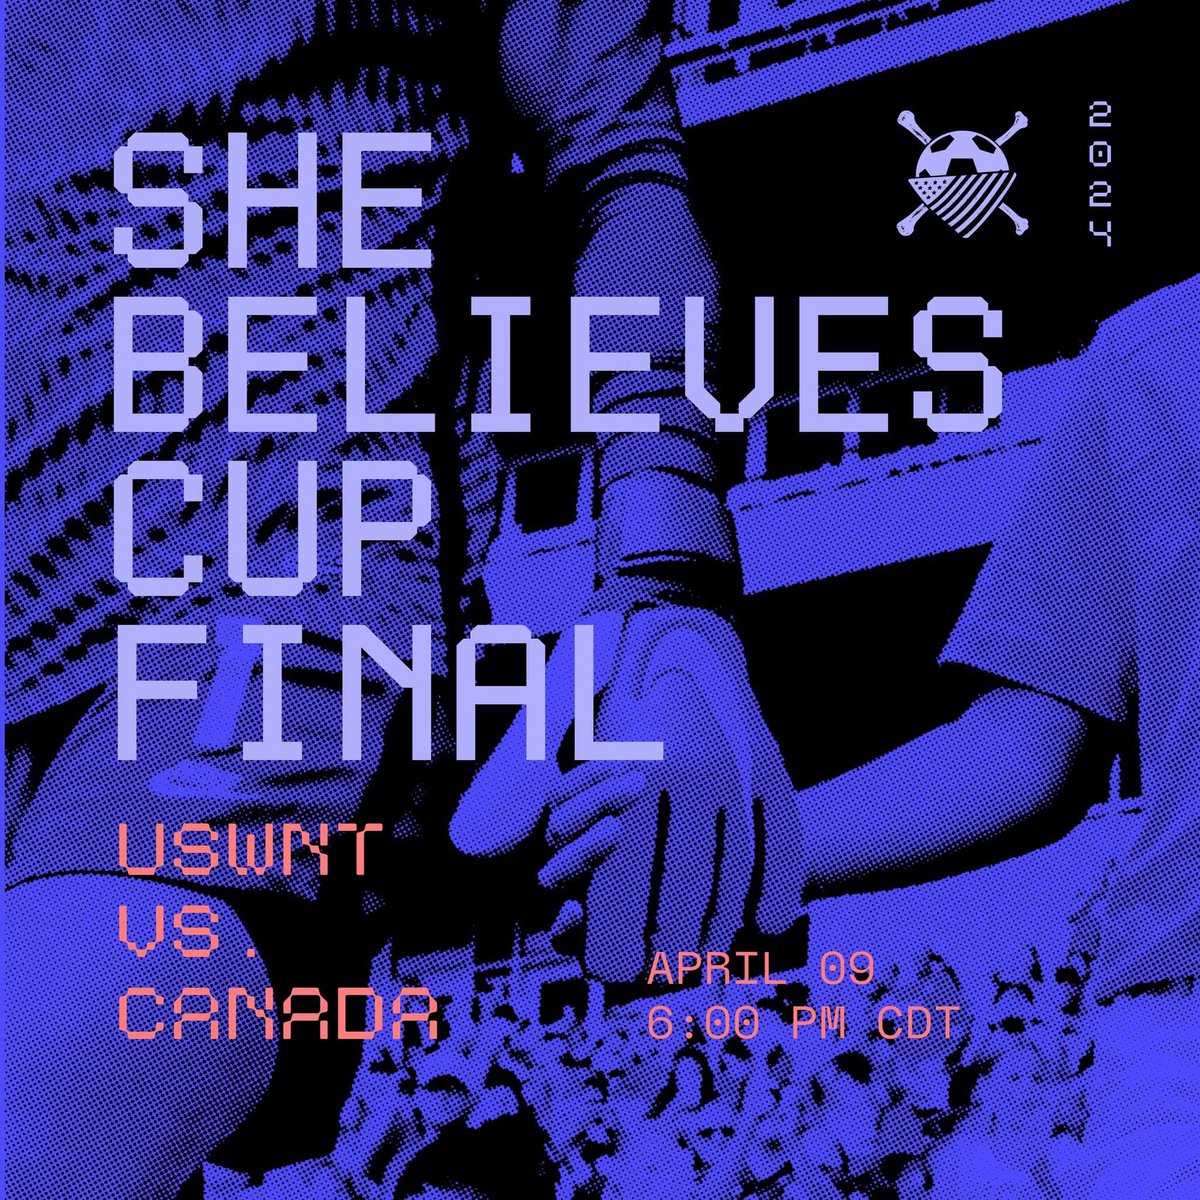 🚨#AOMSP Watch Party 🚨 🏆: She Believes Cup 🏟️: USWNT v Canada 🗓: Mar 9 🕰: 6:00 PM 📺: TBS 🍻: Black Hart of St Paul ⚽️ #USAvCAN